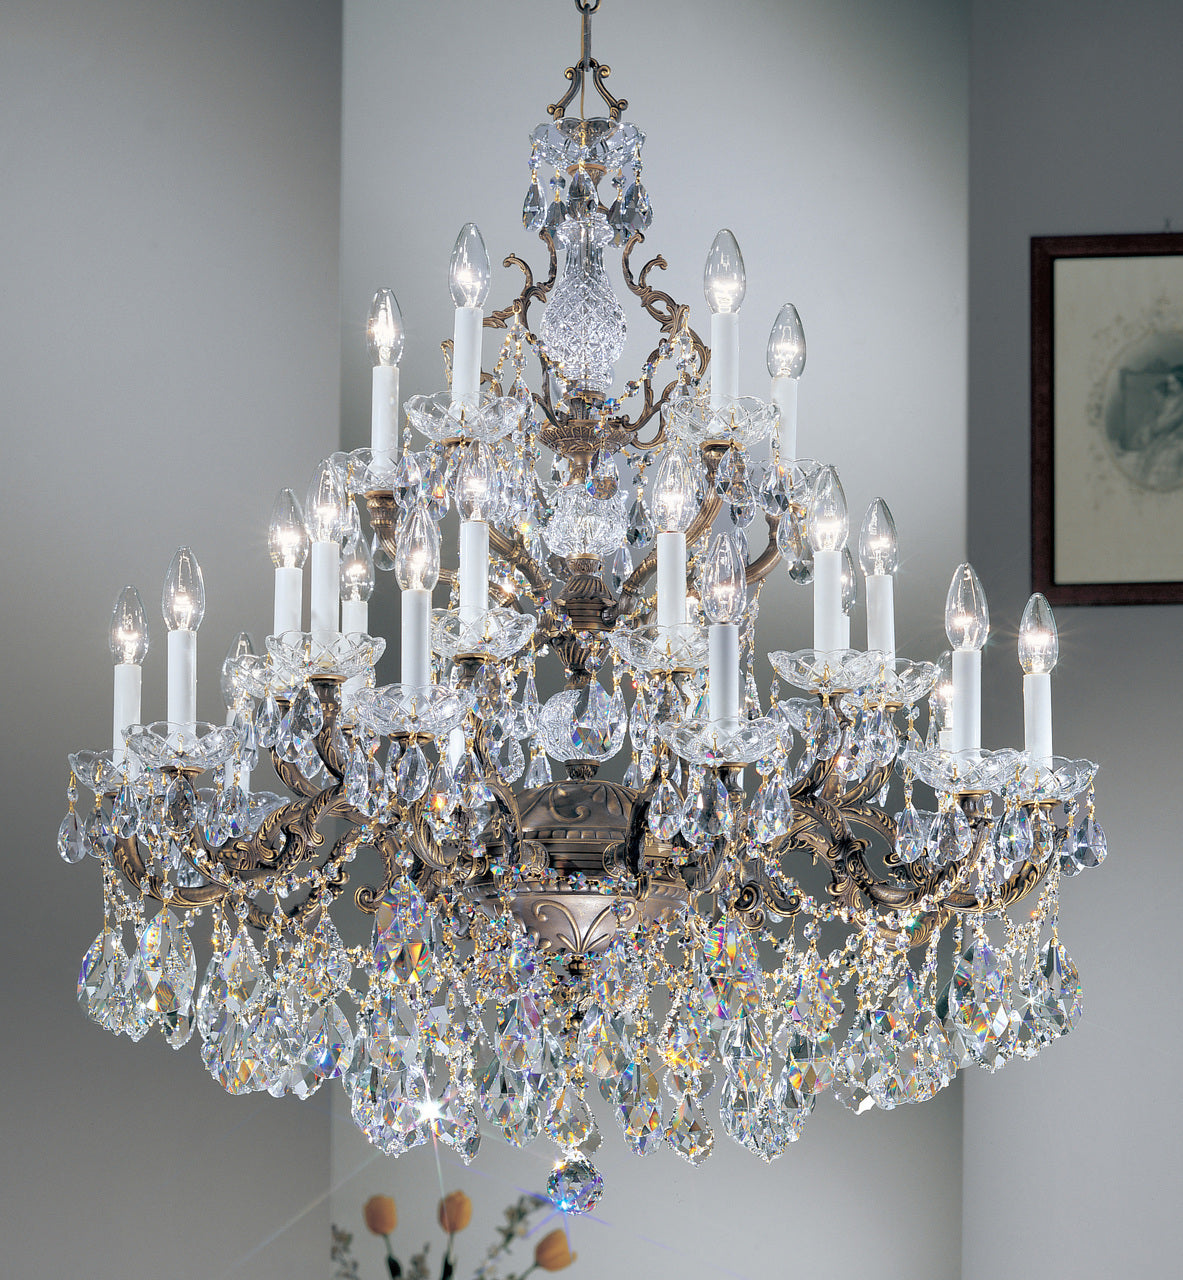 Classic Lighting 5545 OWB S Madrid Imperial Crystal/Cast Brass Chandelier in Olde World Bronze (Imported from Spain)